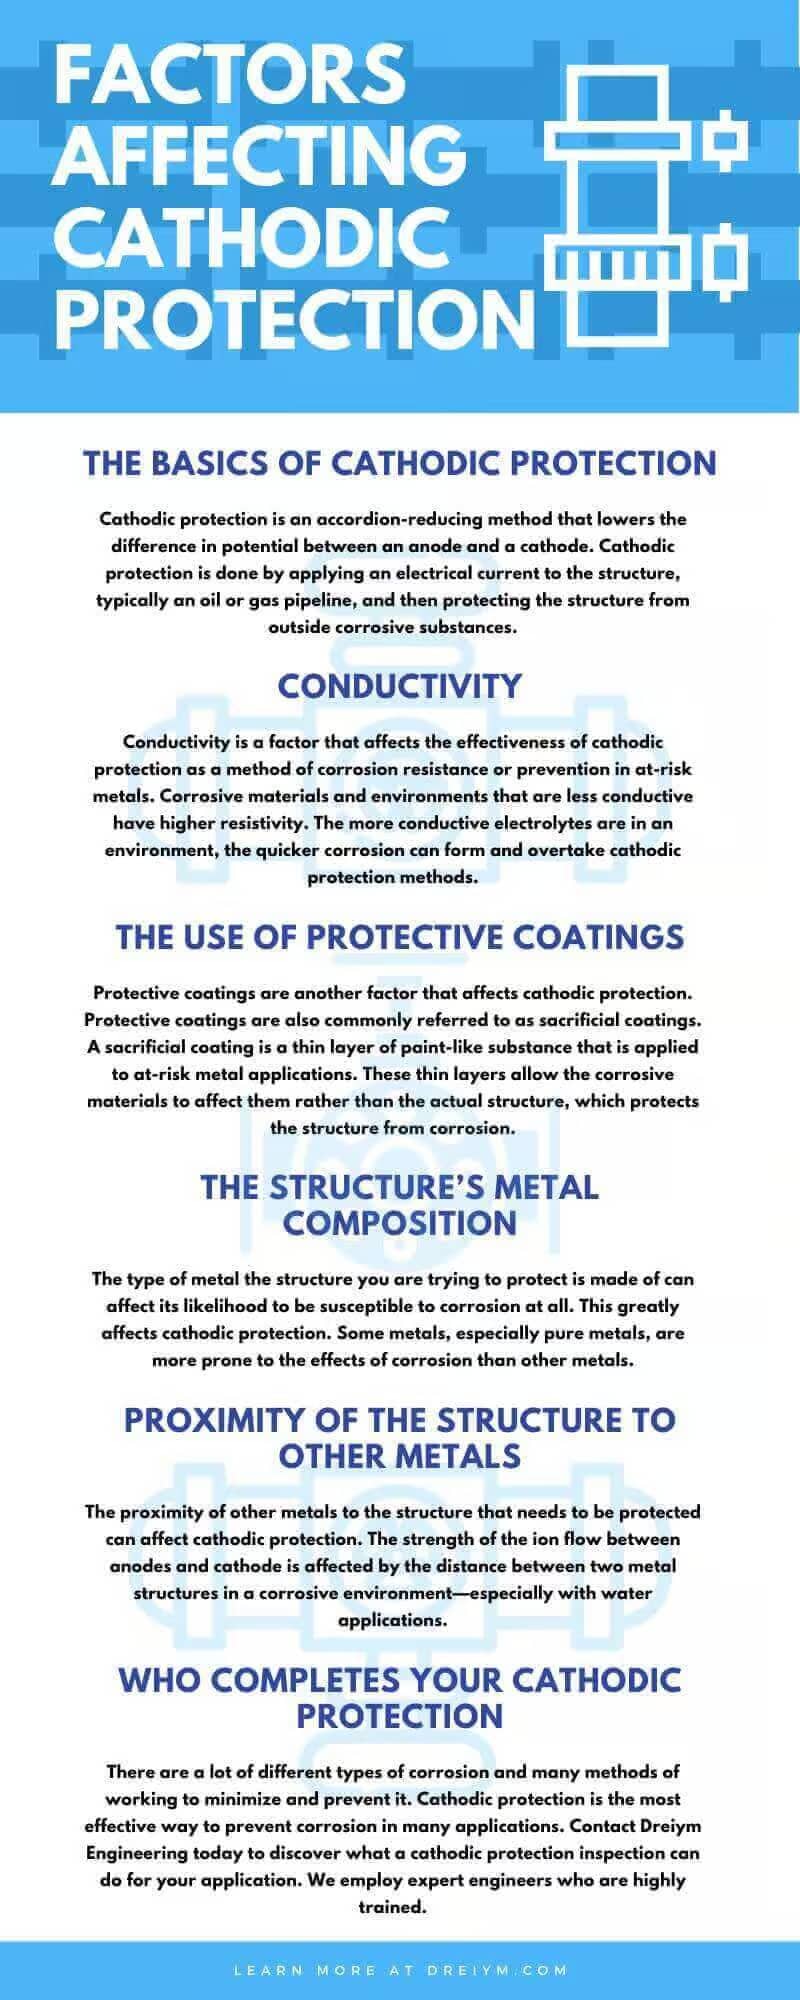 Factors Affecting Cathodic Protection